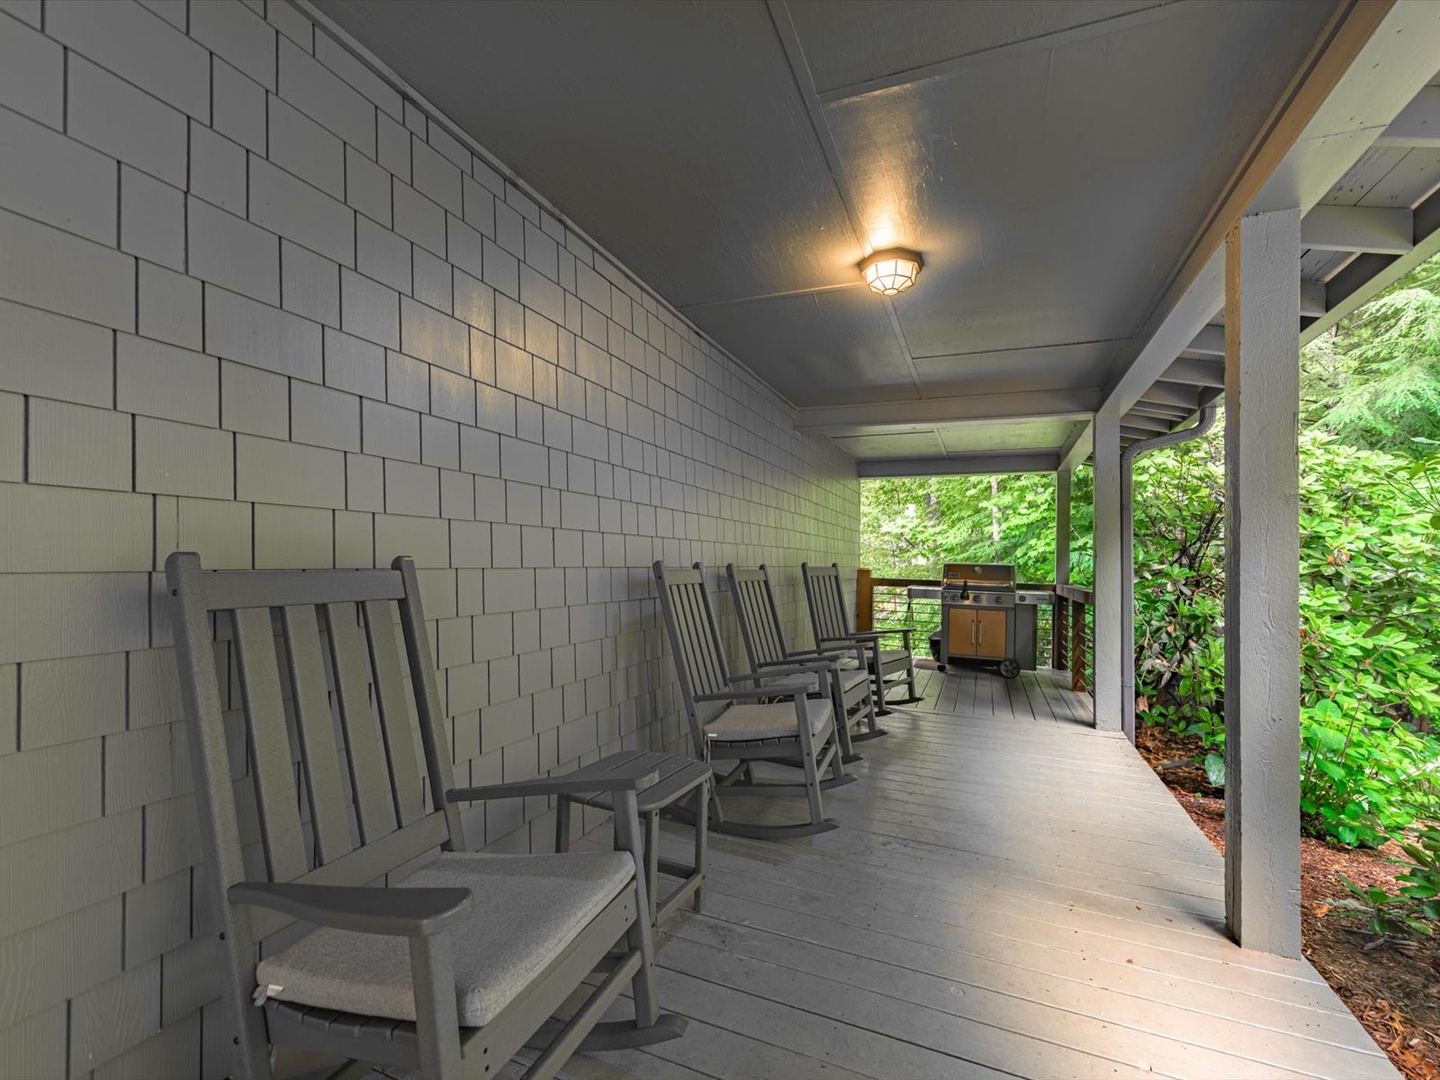 Gleesome Inn- Patio with outdoor seating and rocking chairs